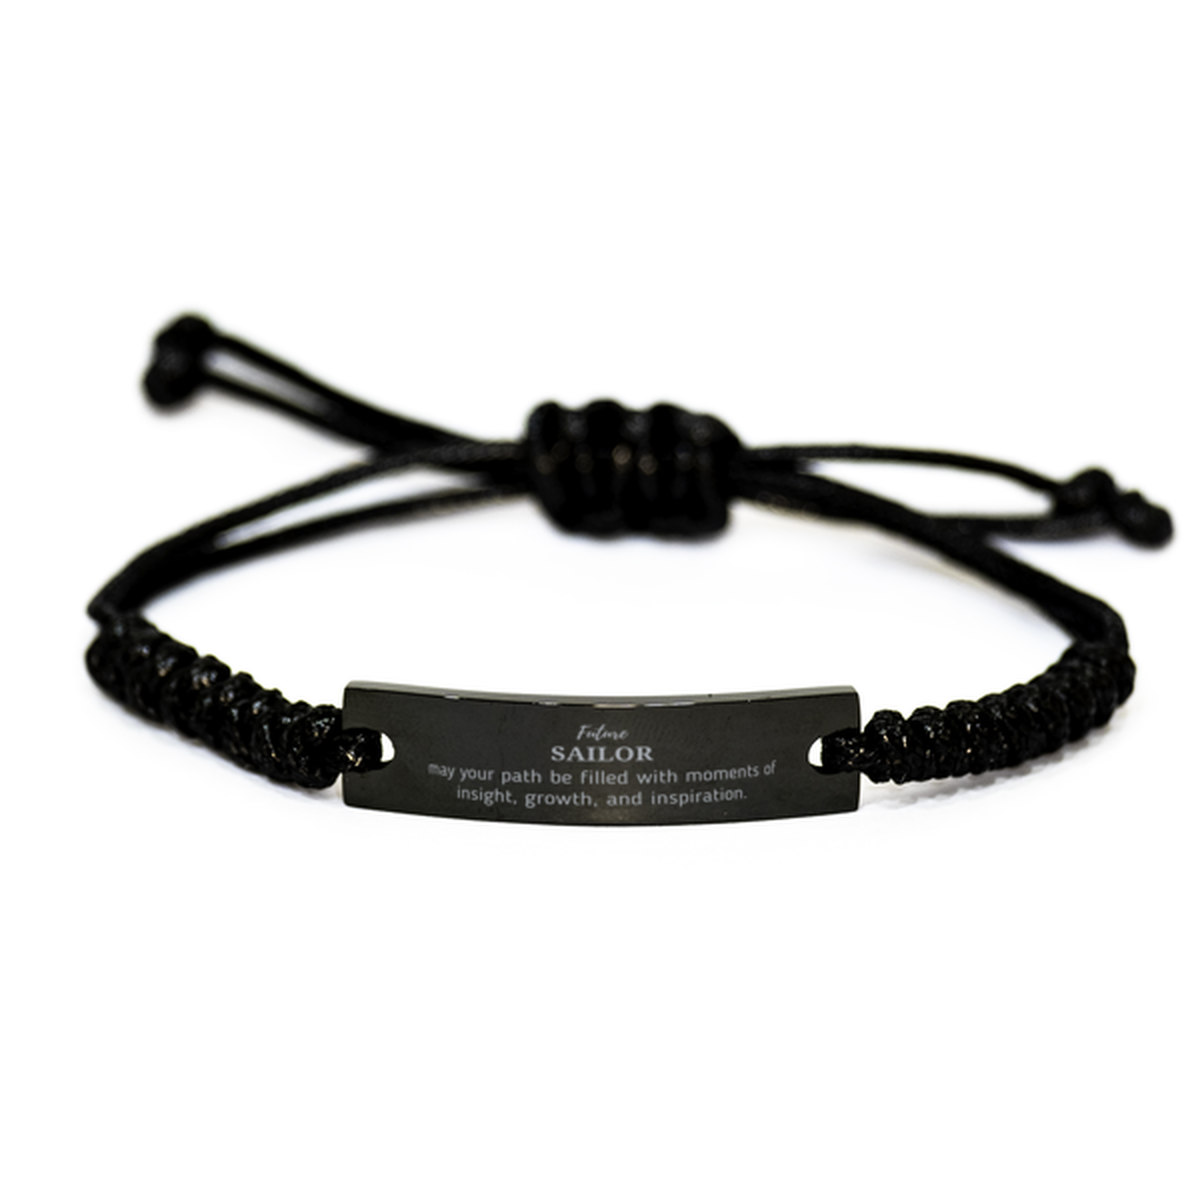 Future Sailor Gifts, May your path be filled with moments of insight, Graduation Gifts for New Sailor, Christmas Unique Black Rope Bracelet For Men, Women, Friends